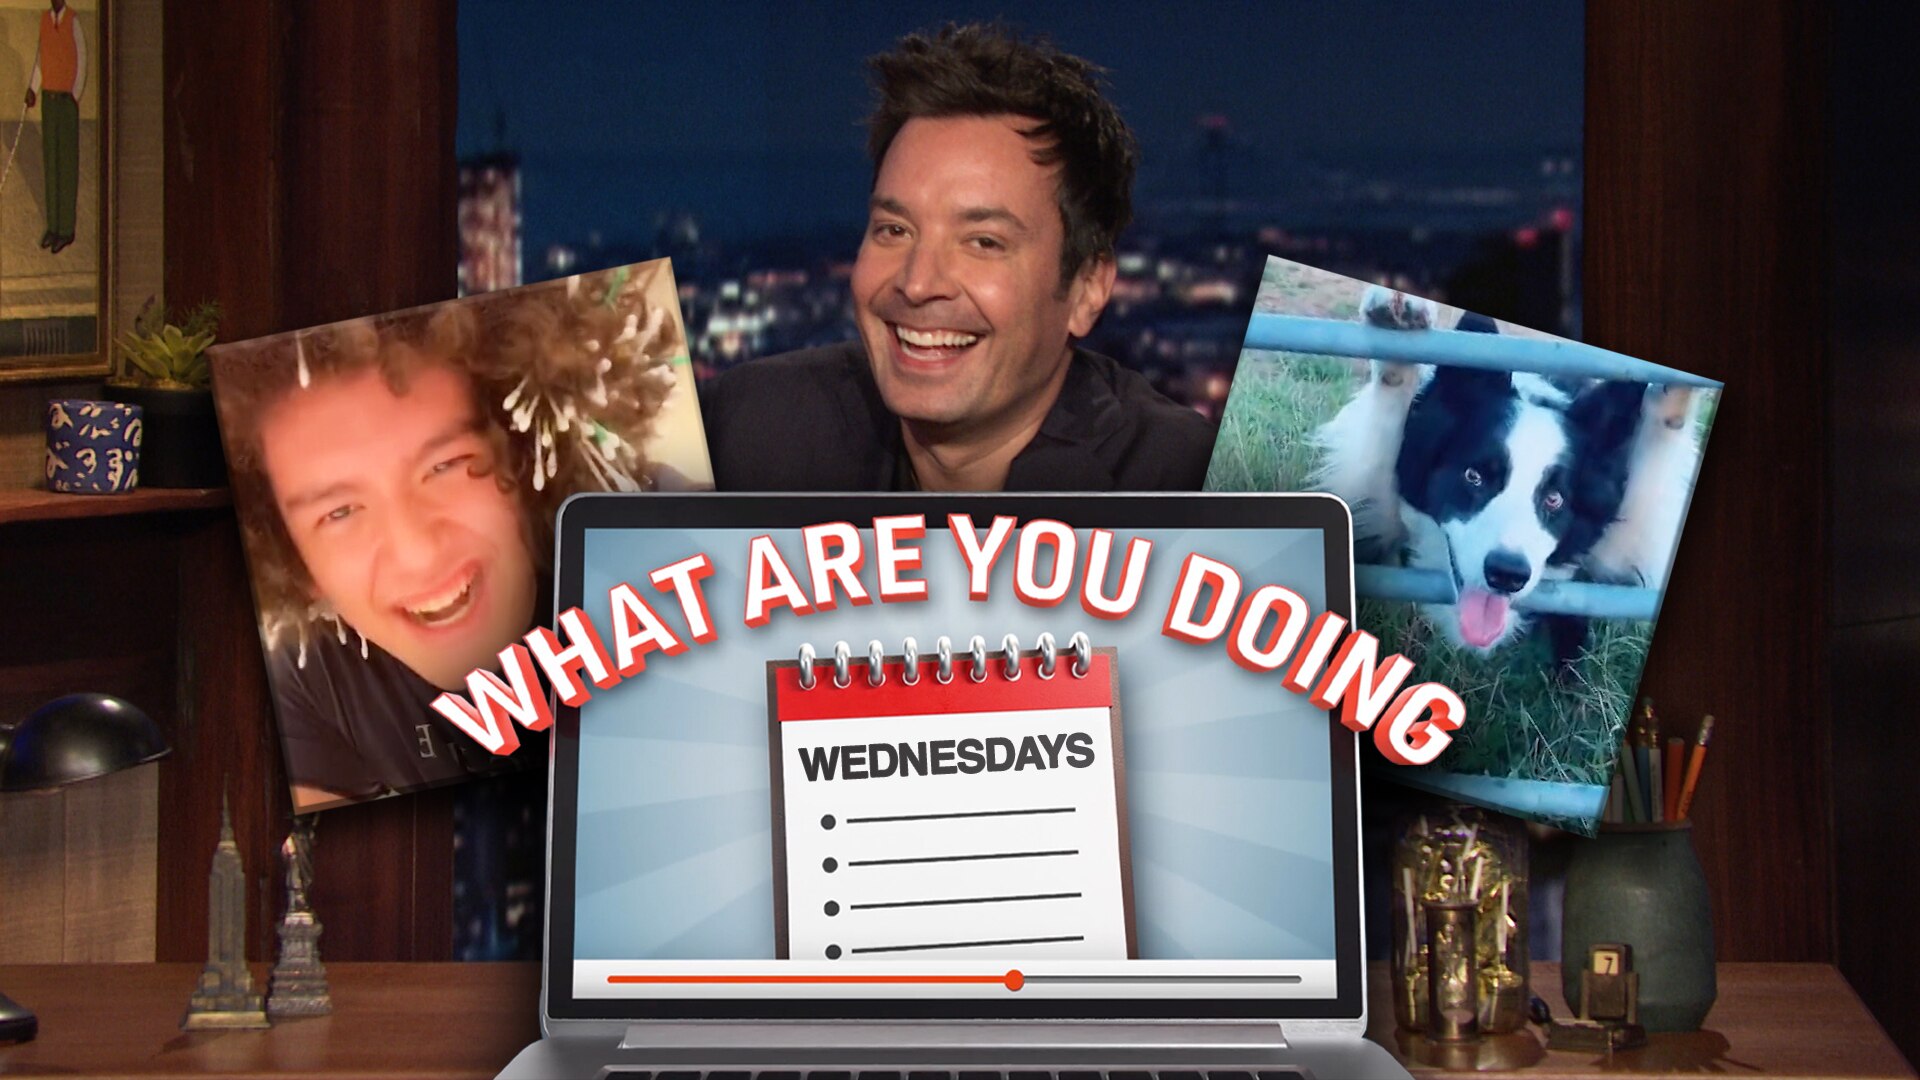 Watch The Tonight Show Starring Jimmy Fallon Highlight: What Are You